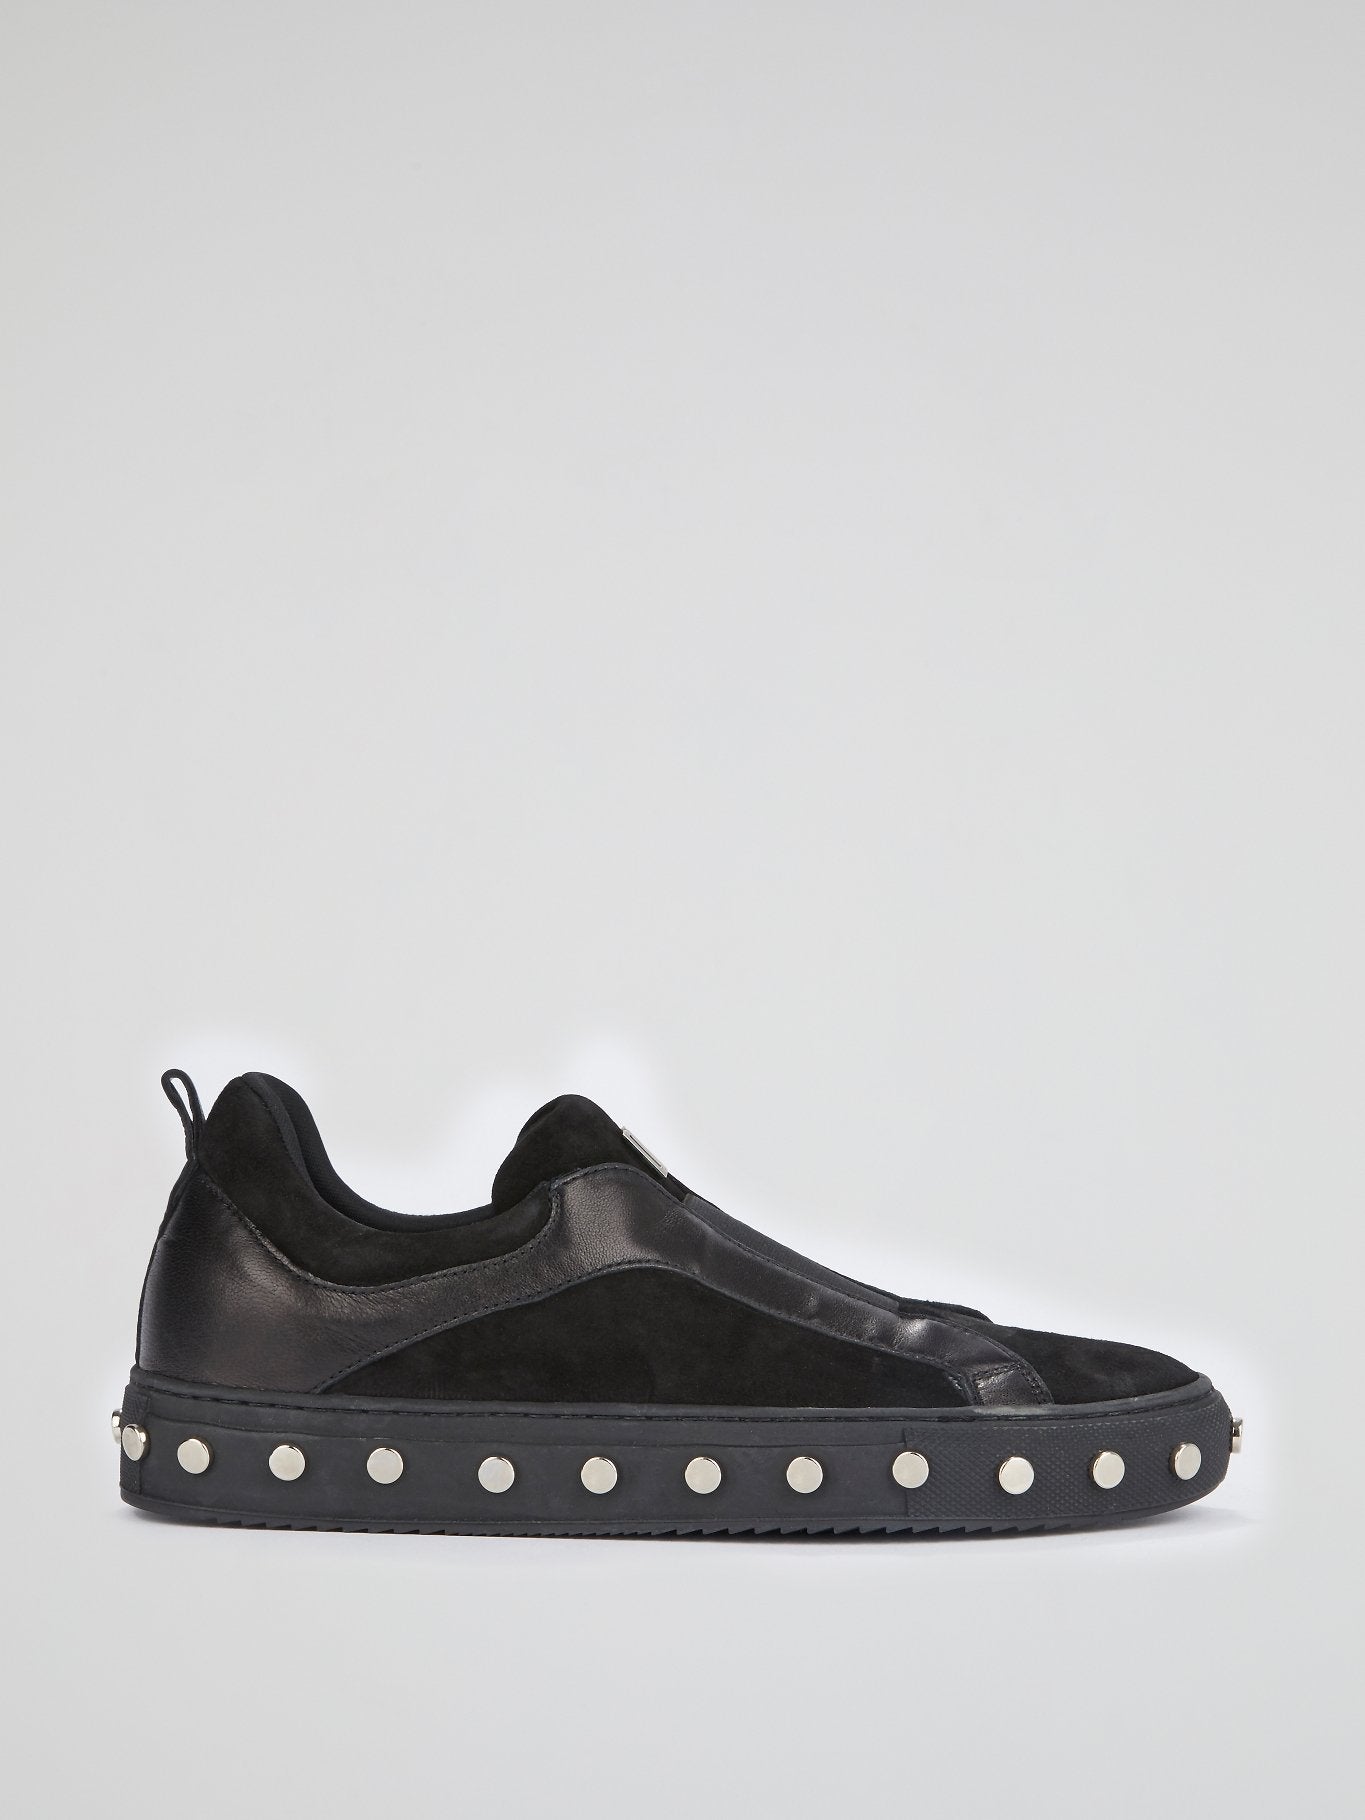 Black Studded Sole Slip On Sneakers